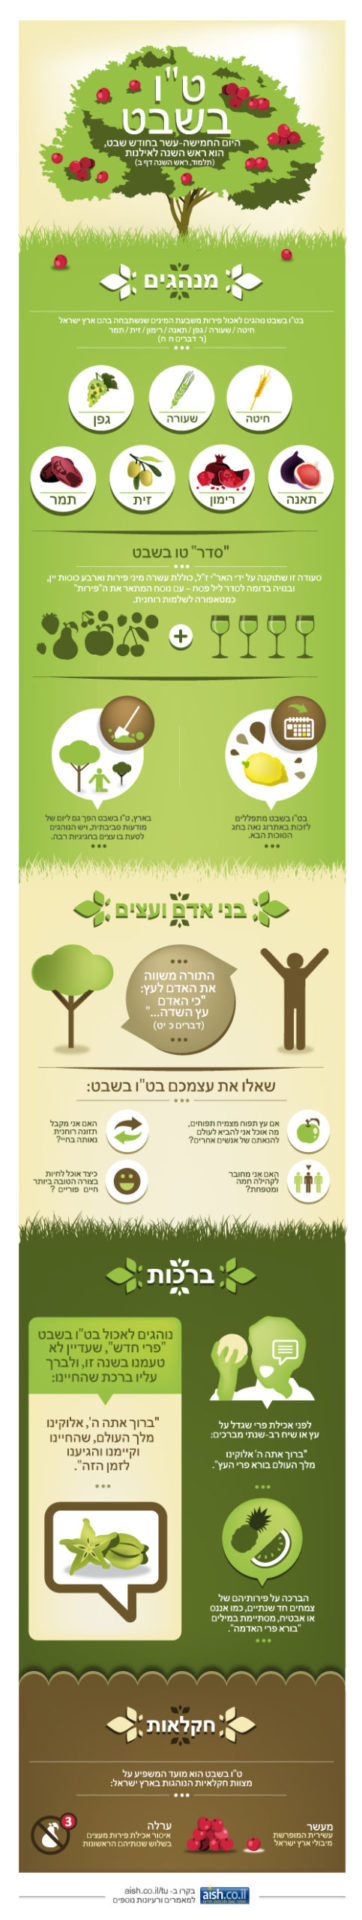 Tu B'Shvat: The 15th of the Hebrew Month of Shvat, is the "new year for trees" (Talmud - Rosh Hashanah 2a)